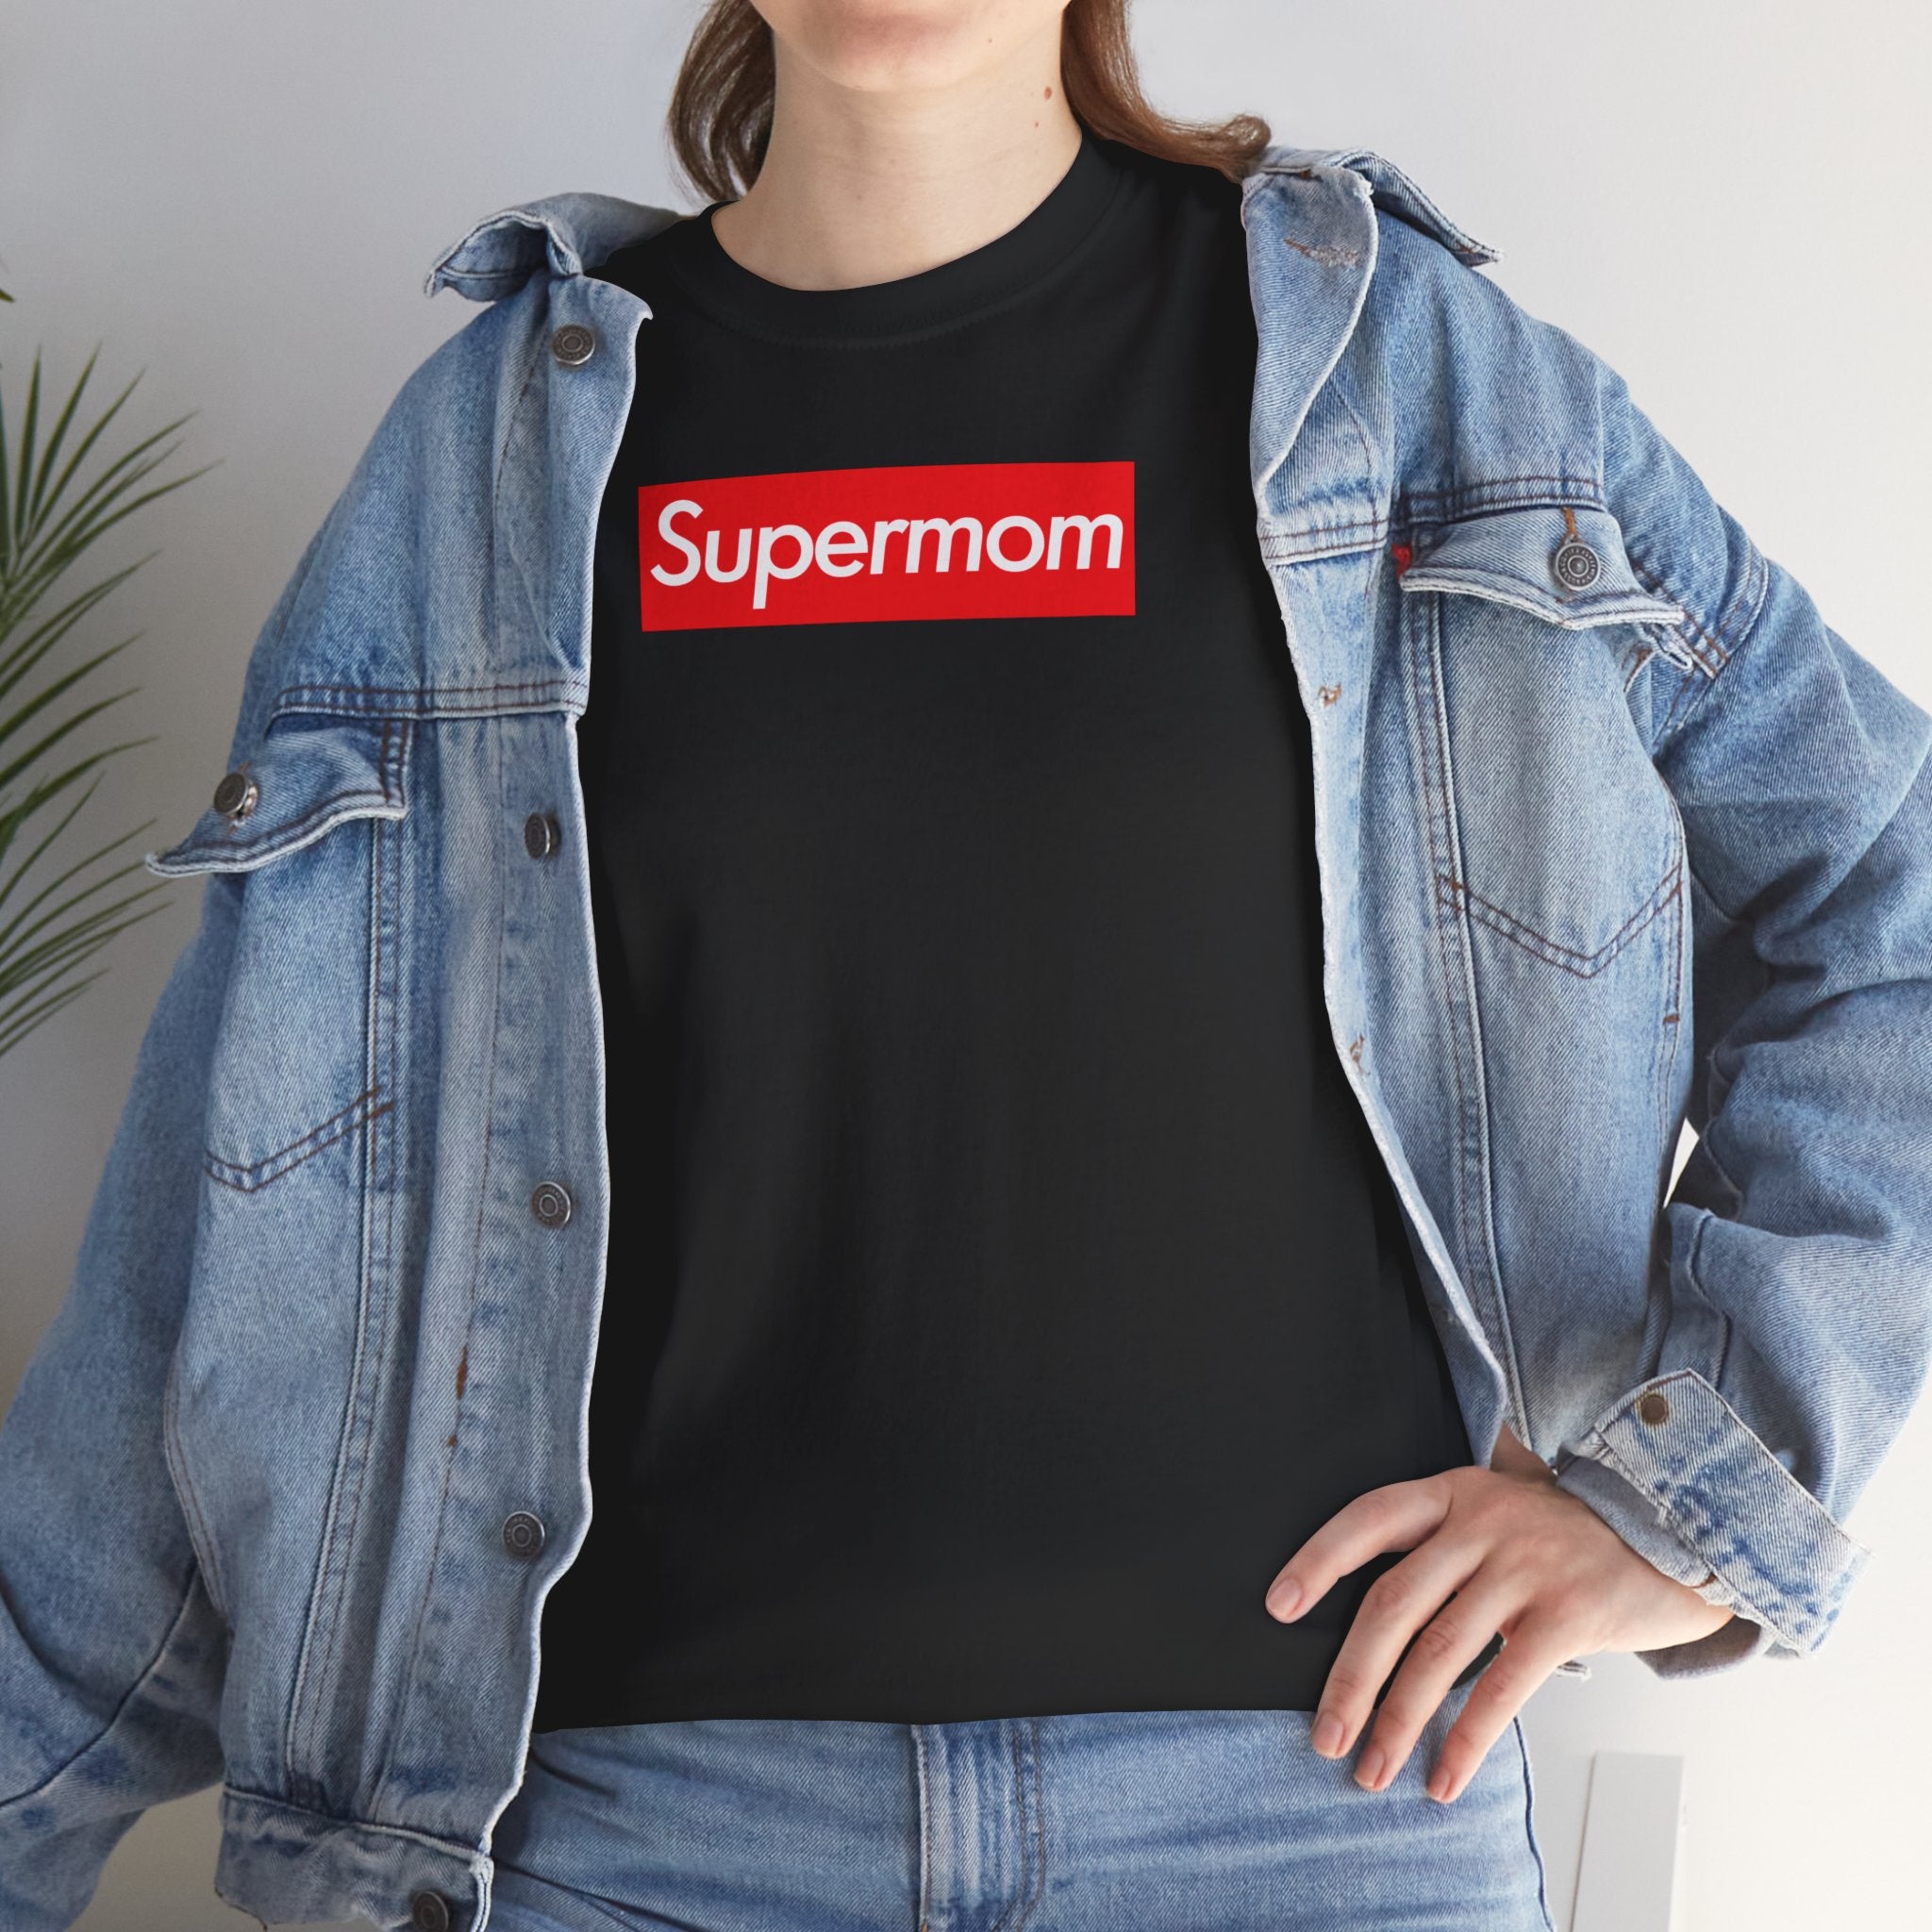 Supermom Unisex Heavy Cotton Tee Shirt T-shirt super Inspired Funny Mom Mother Appreciation Gift For Mothers Moms Love Mother's Day Thank You Thankful Birthday Christmas